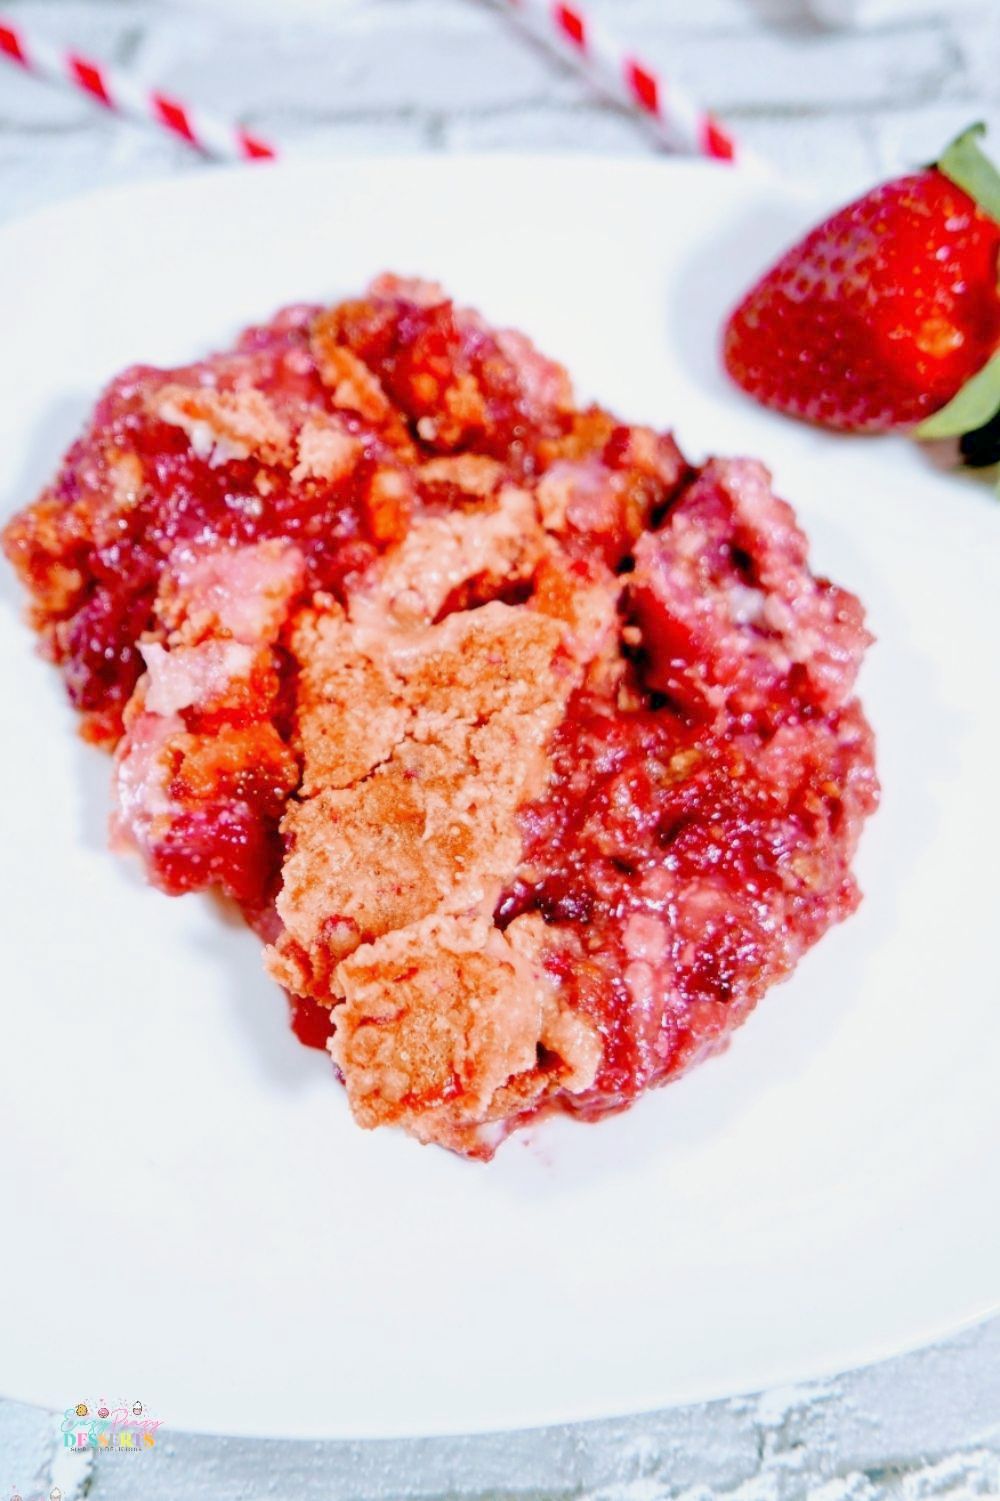 Strawberry cake crumble in a white serving plate